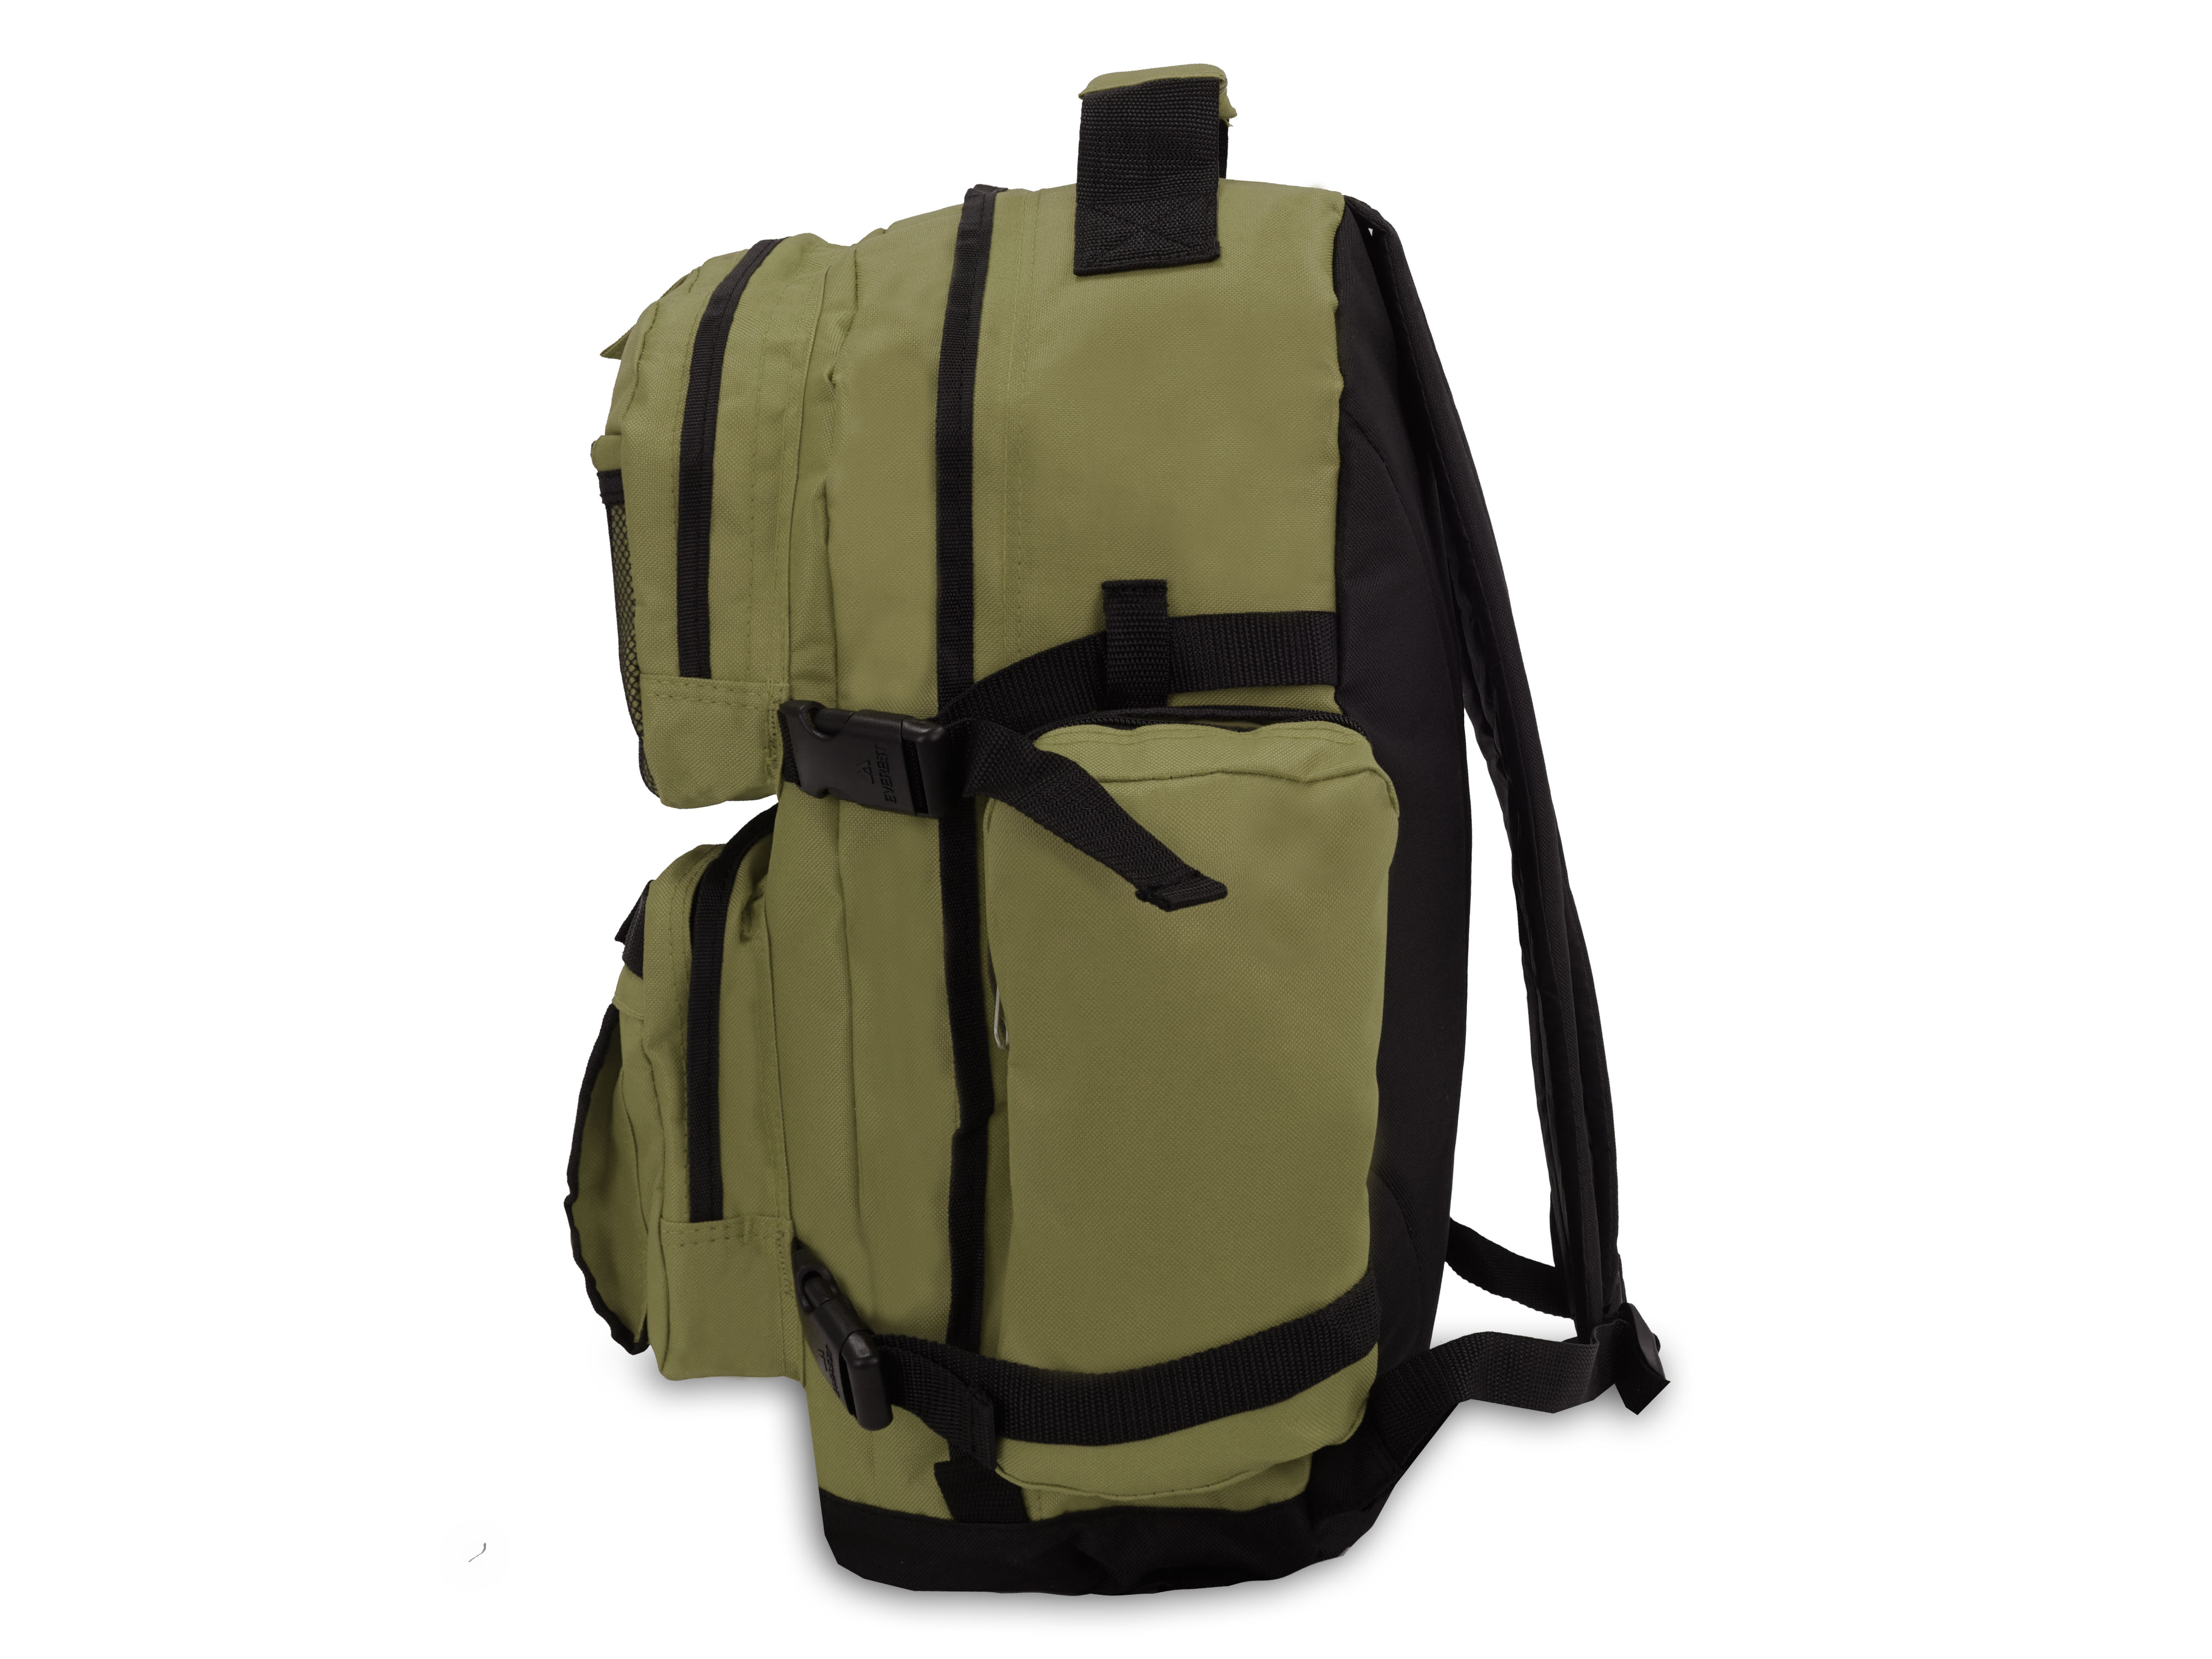 Everest 20" Oversized Deluxe Backpack, Olive All Ages, Unisex 3045R-OLI/BK, Carrier and Shoulder Book Bag for School, Work, Sports, and Travel - image 4 of 5